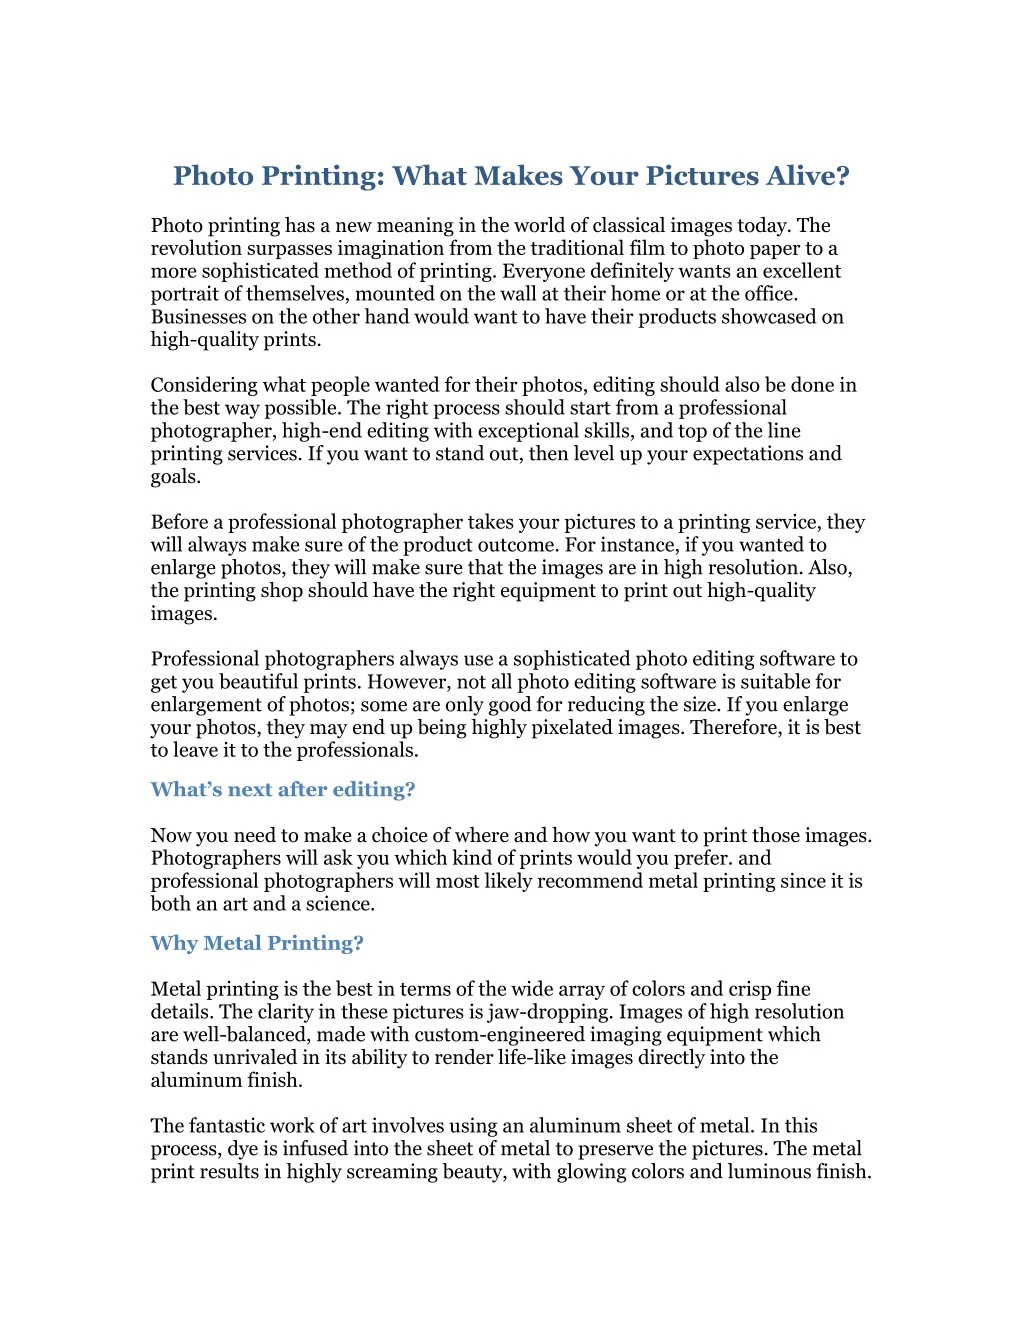 photo printing what makes your pictures alive